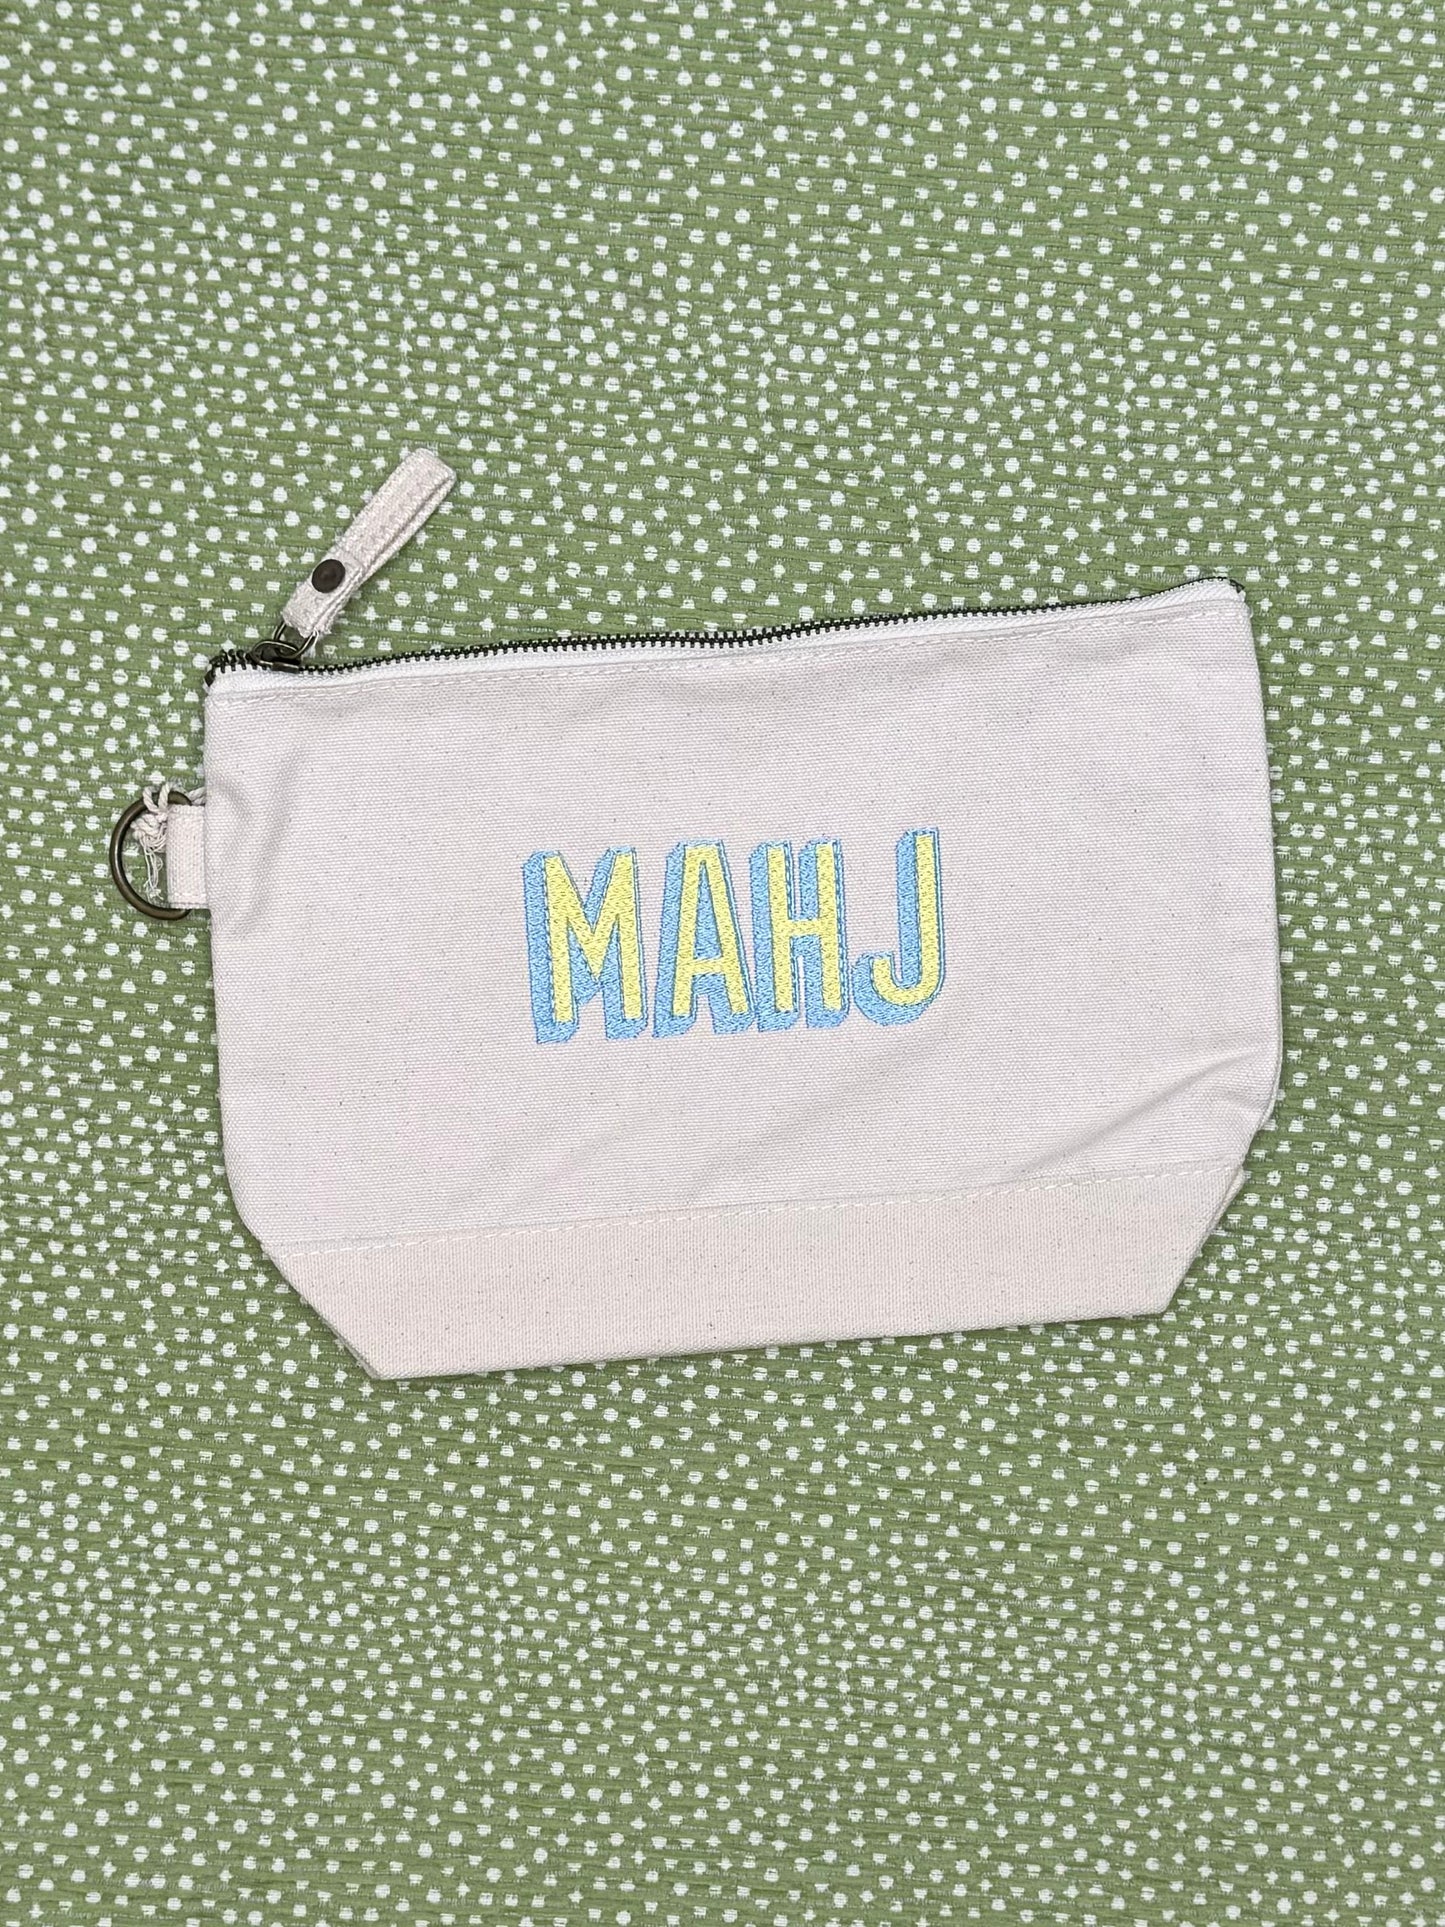 MAHJ All-in Pouch